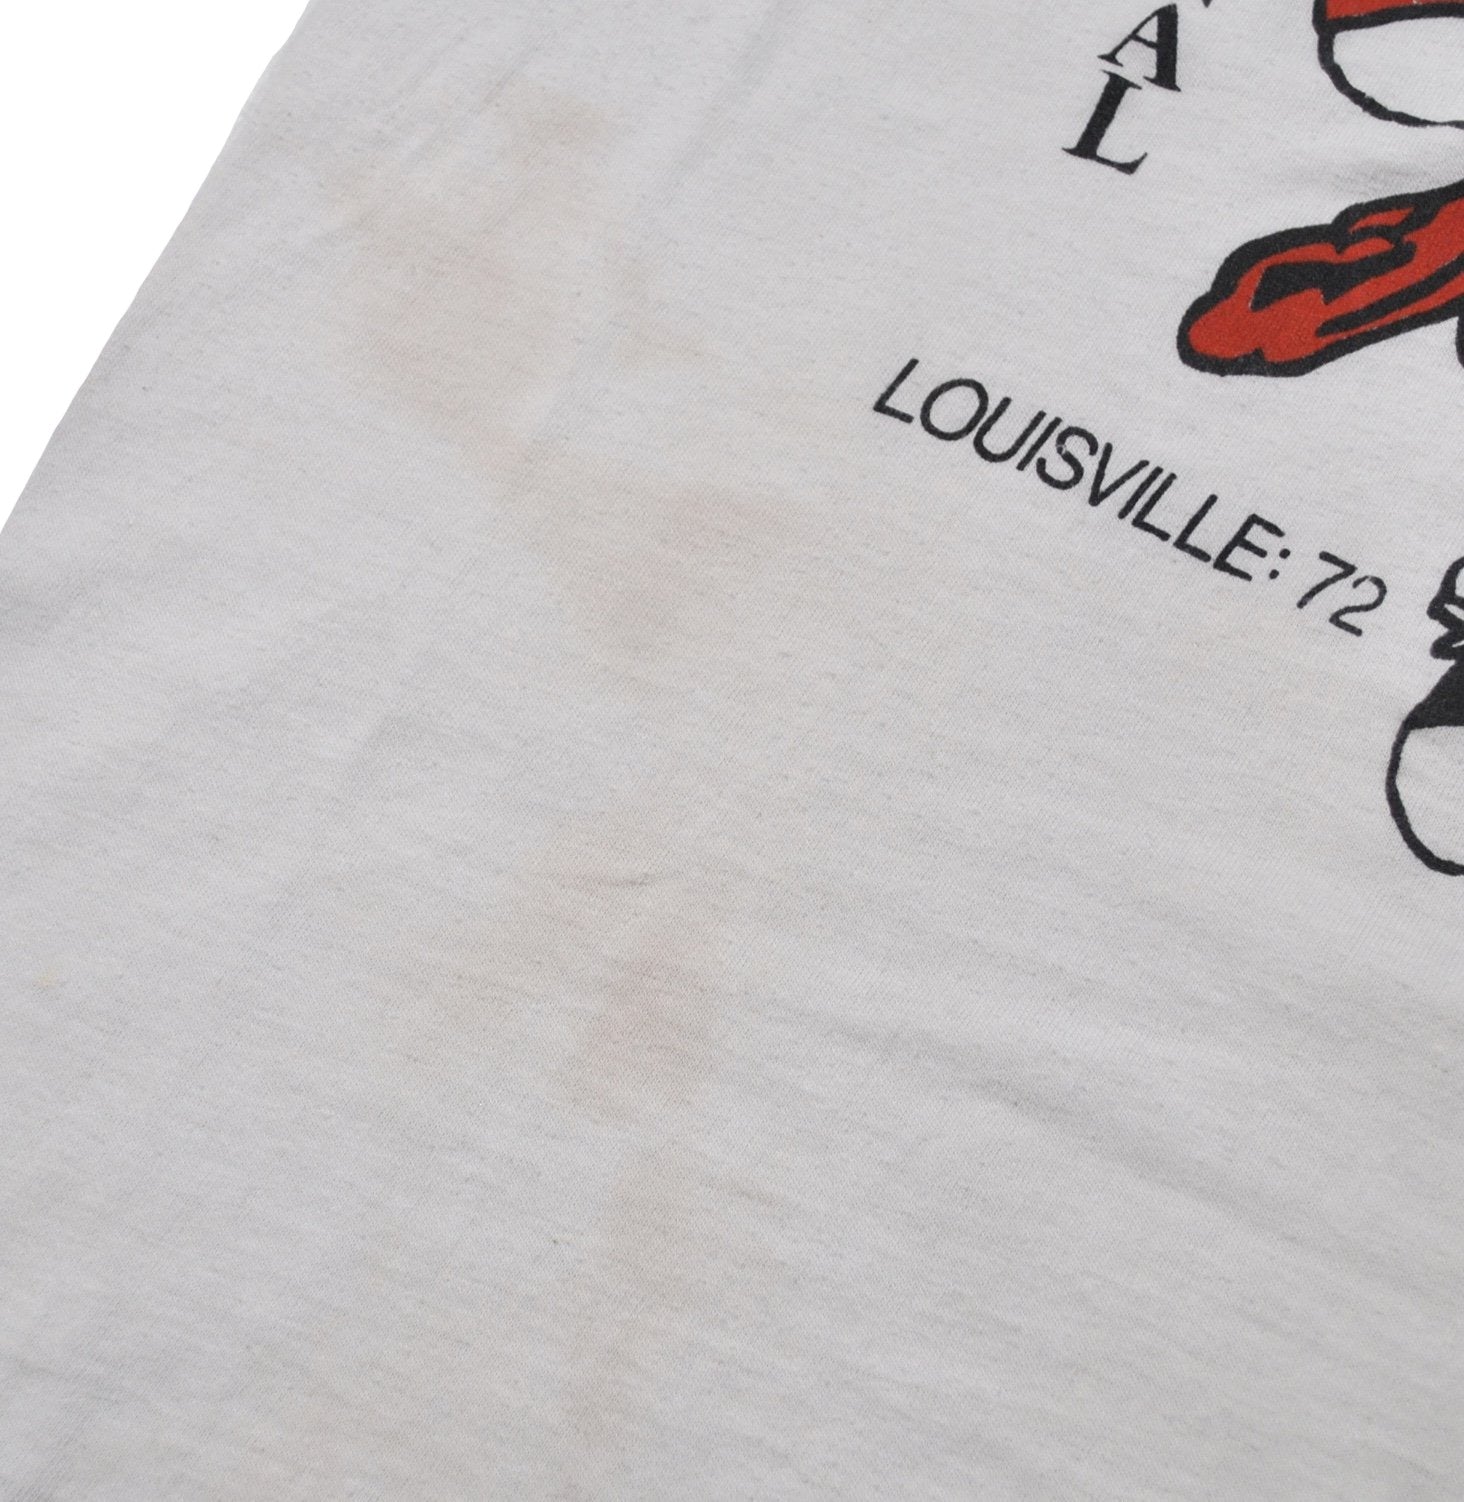 Vintage Louisville Cardinals 1986 National Champions Shirt Size Small –  Yesterday's Attic